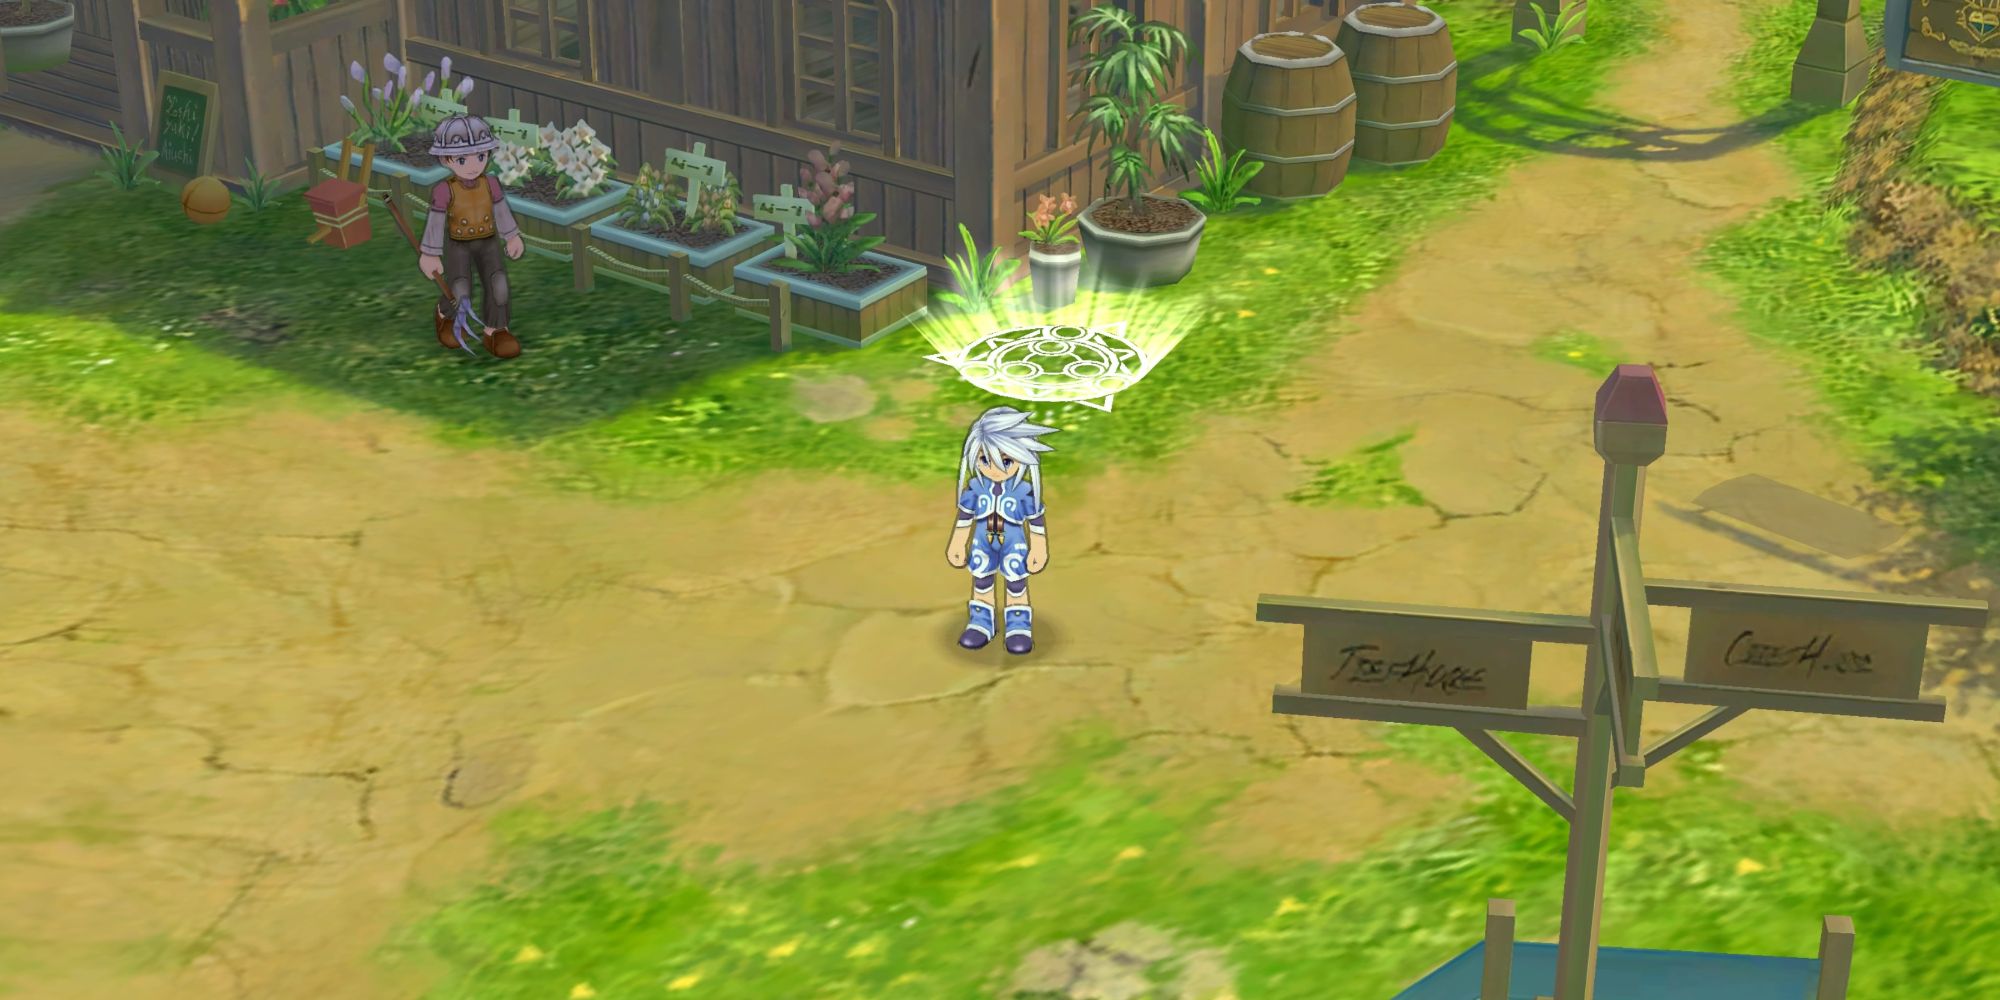 Controlling Genis when exploring the village of Iselia in Tales of Symphonia Remastered